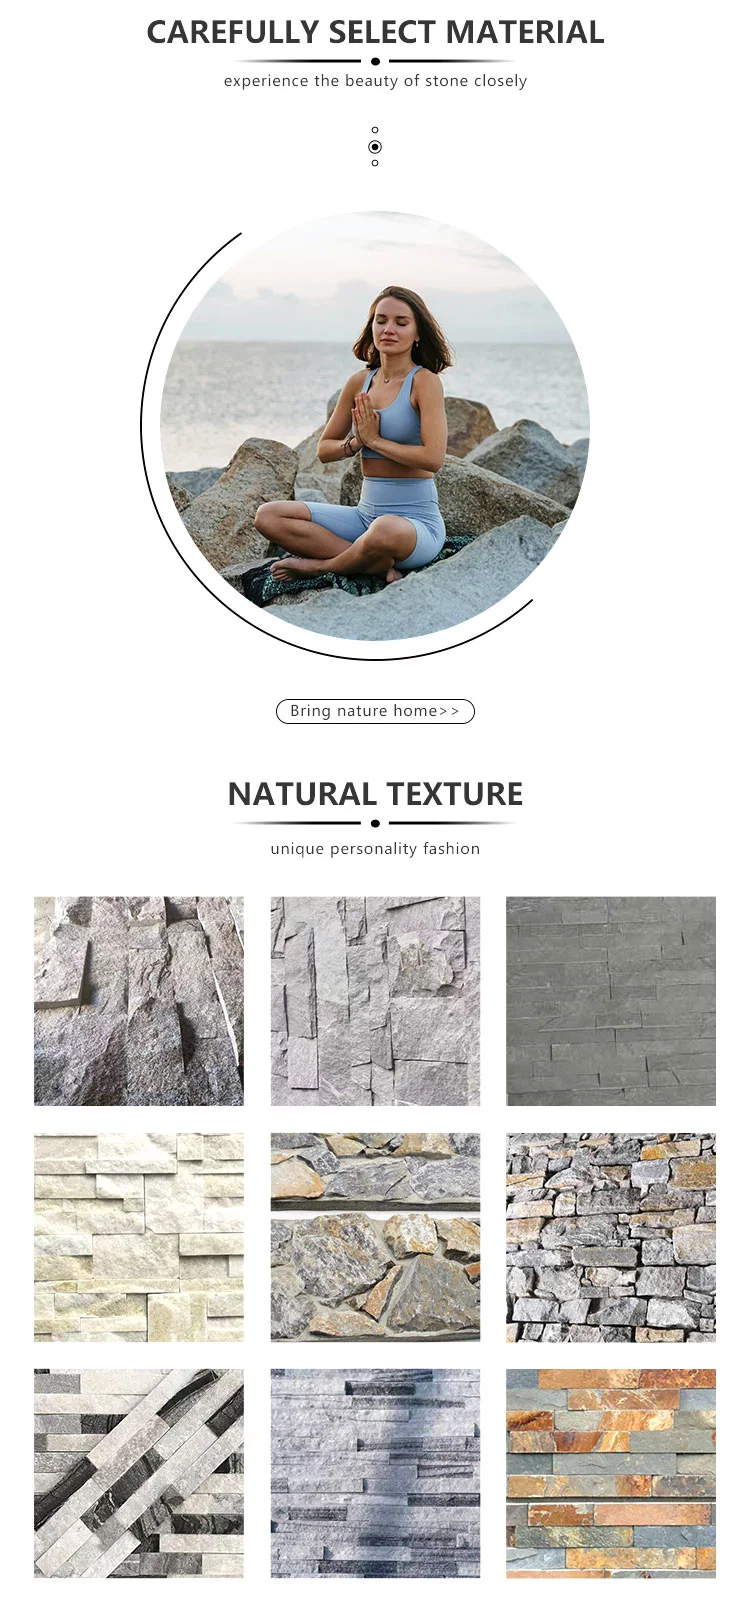 Blve House Exterior Wall Veneer Slate Stone Panels Natural Stone Tiles Wall Cladding Culture Stone